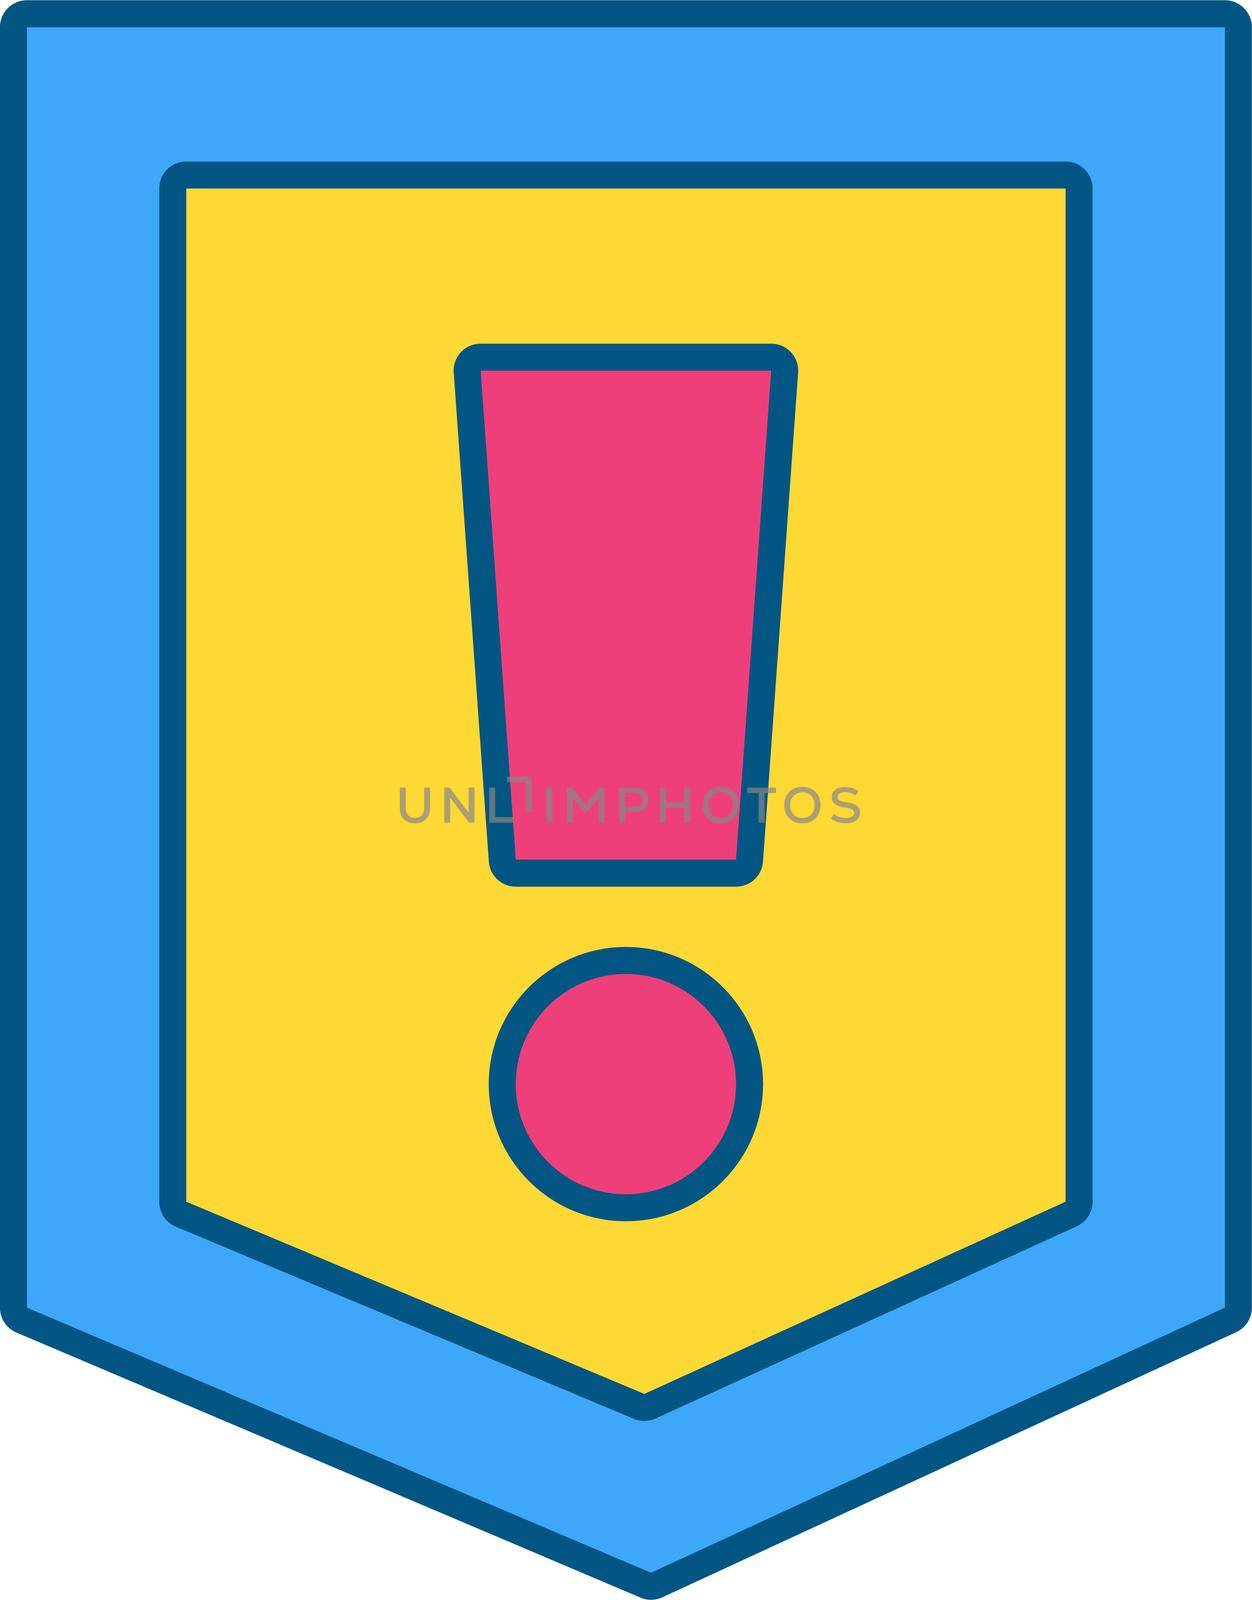 Shield with Exclamation Mark, Danger Hazard Sign Design. Careful Psychological Type. Alert Information Symbol. Colorful Attention and Caution Mark Vector Illustration